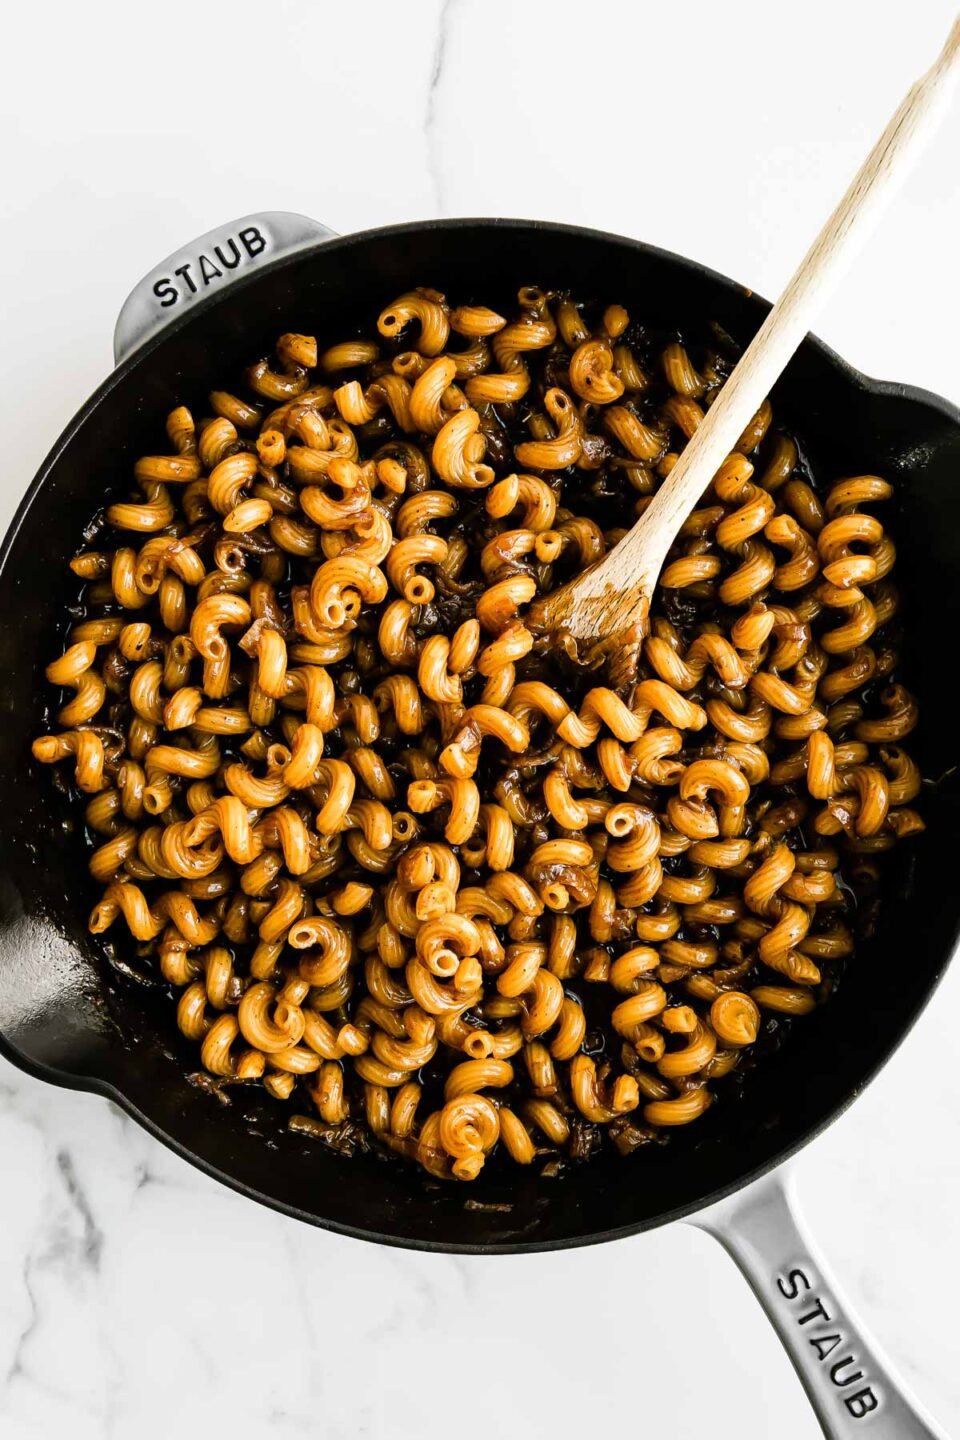 Cavatappi pasta cooks inside of reserved beef stock along with caramelized onions in a large gray Staub cast iron skillet. The skillet sits atop a white and gray marble surface and a wooden spoon rests inside of the skillet for stirring.